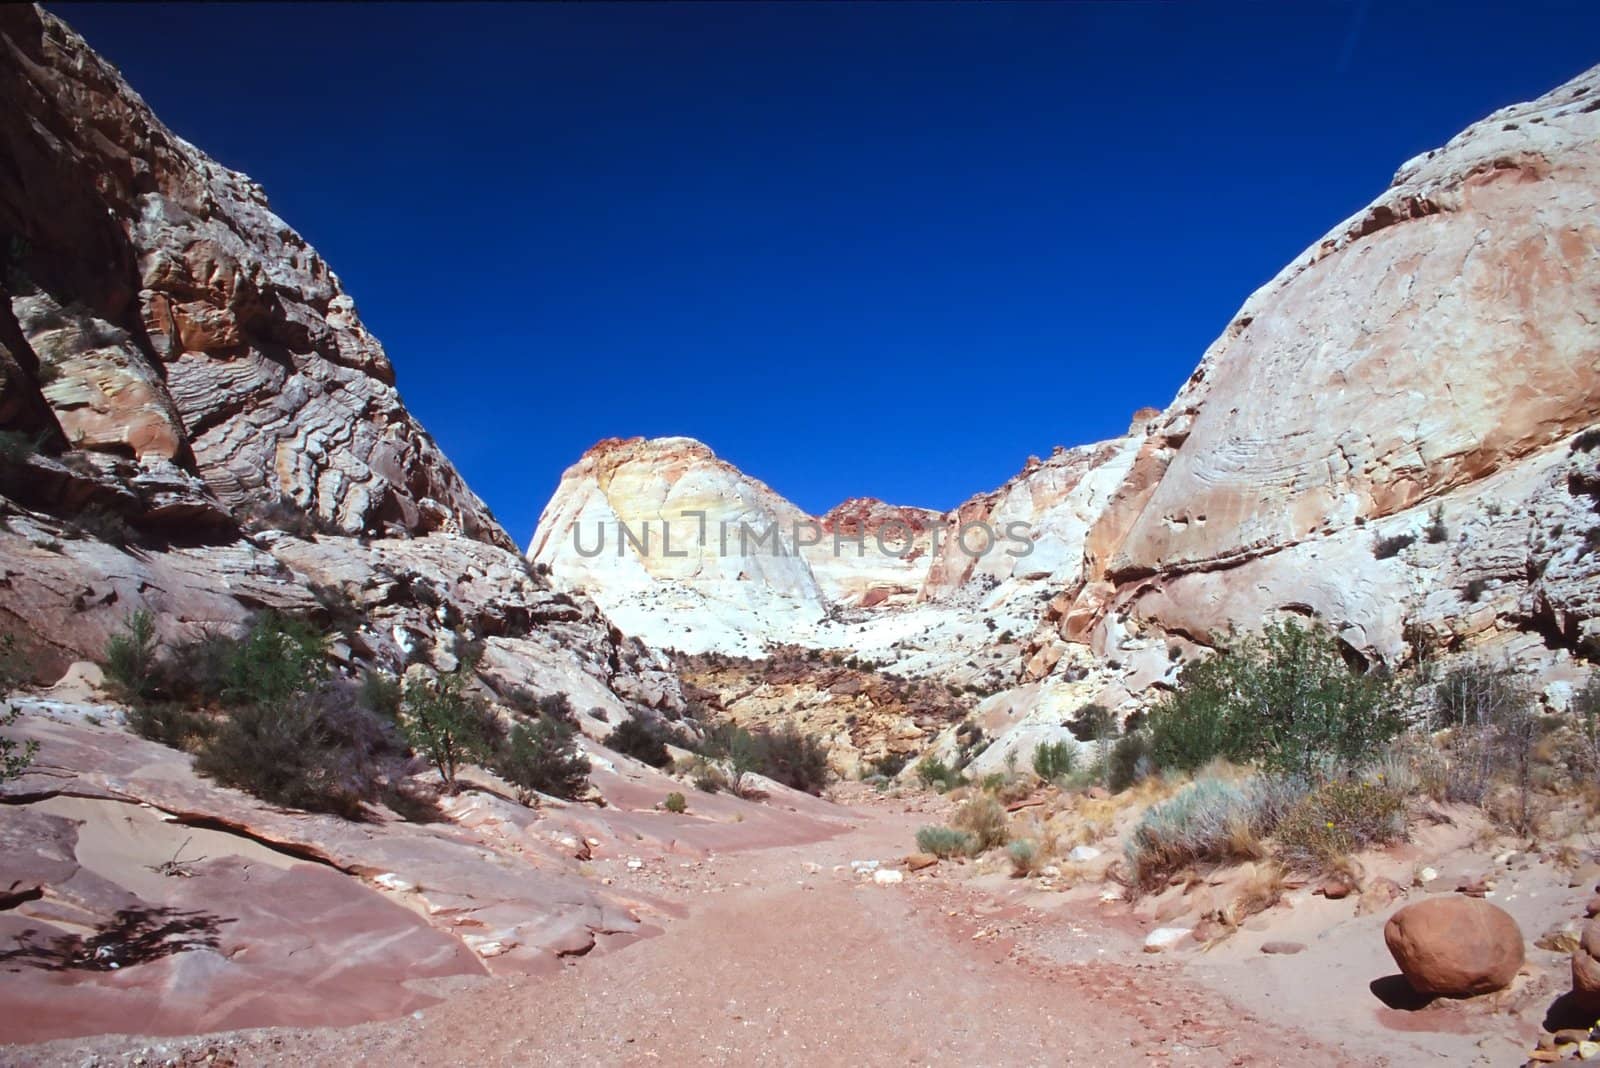 Capitol Reef National Park is a United States National Park, in south-central Utah.